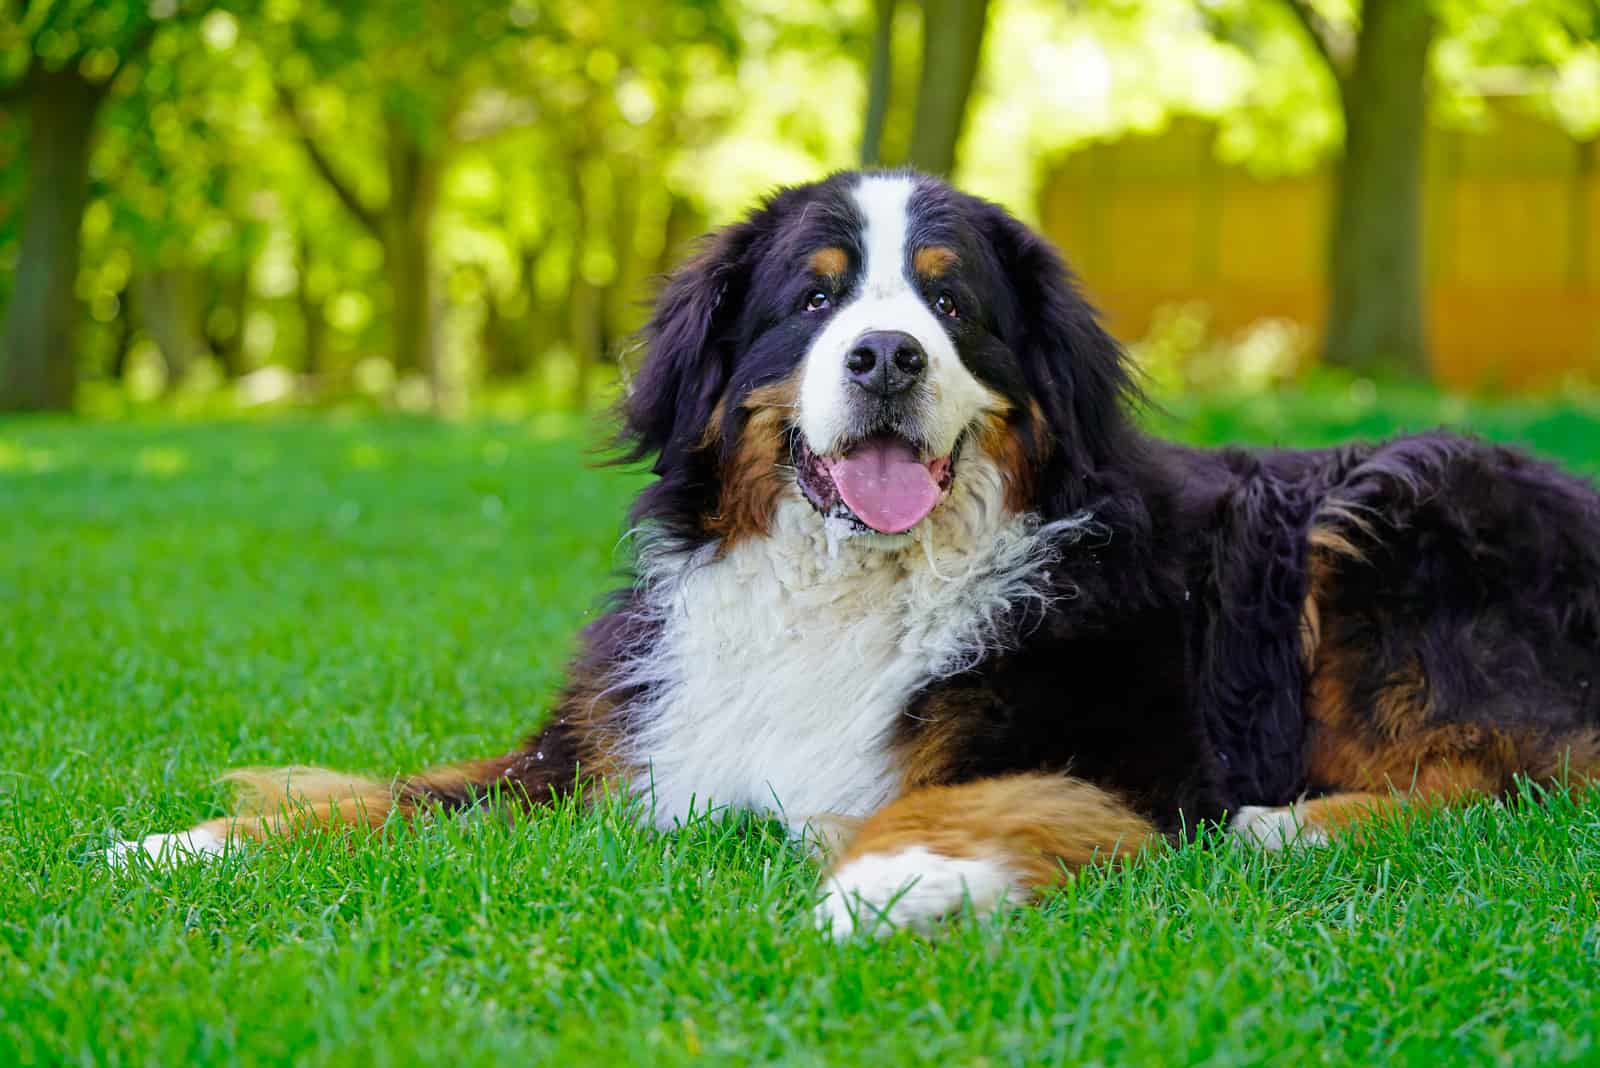 Bernese Mountain Dog lying on the grass in the park